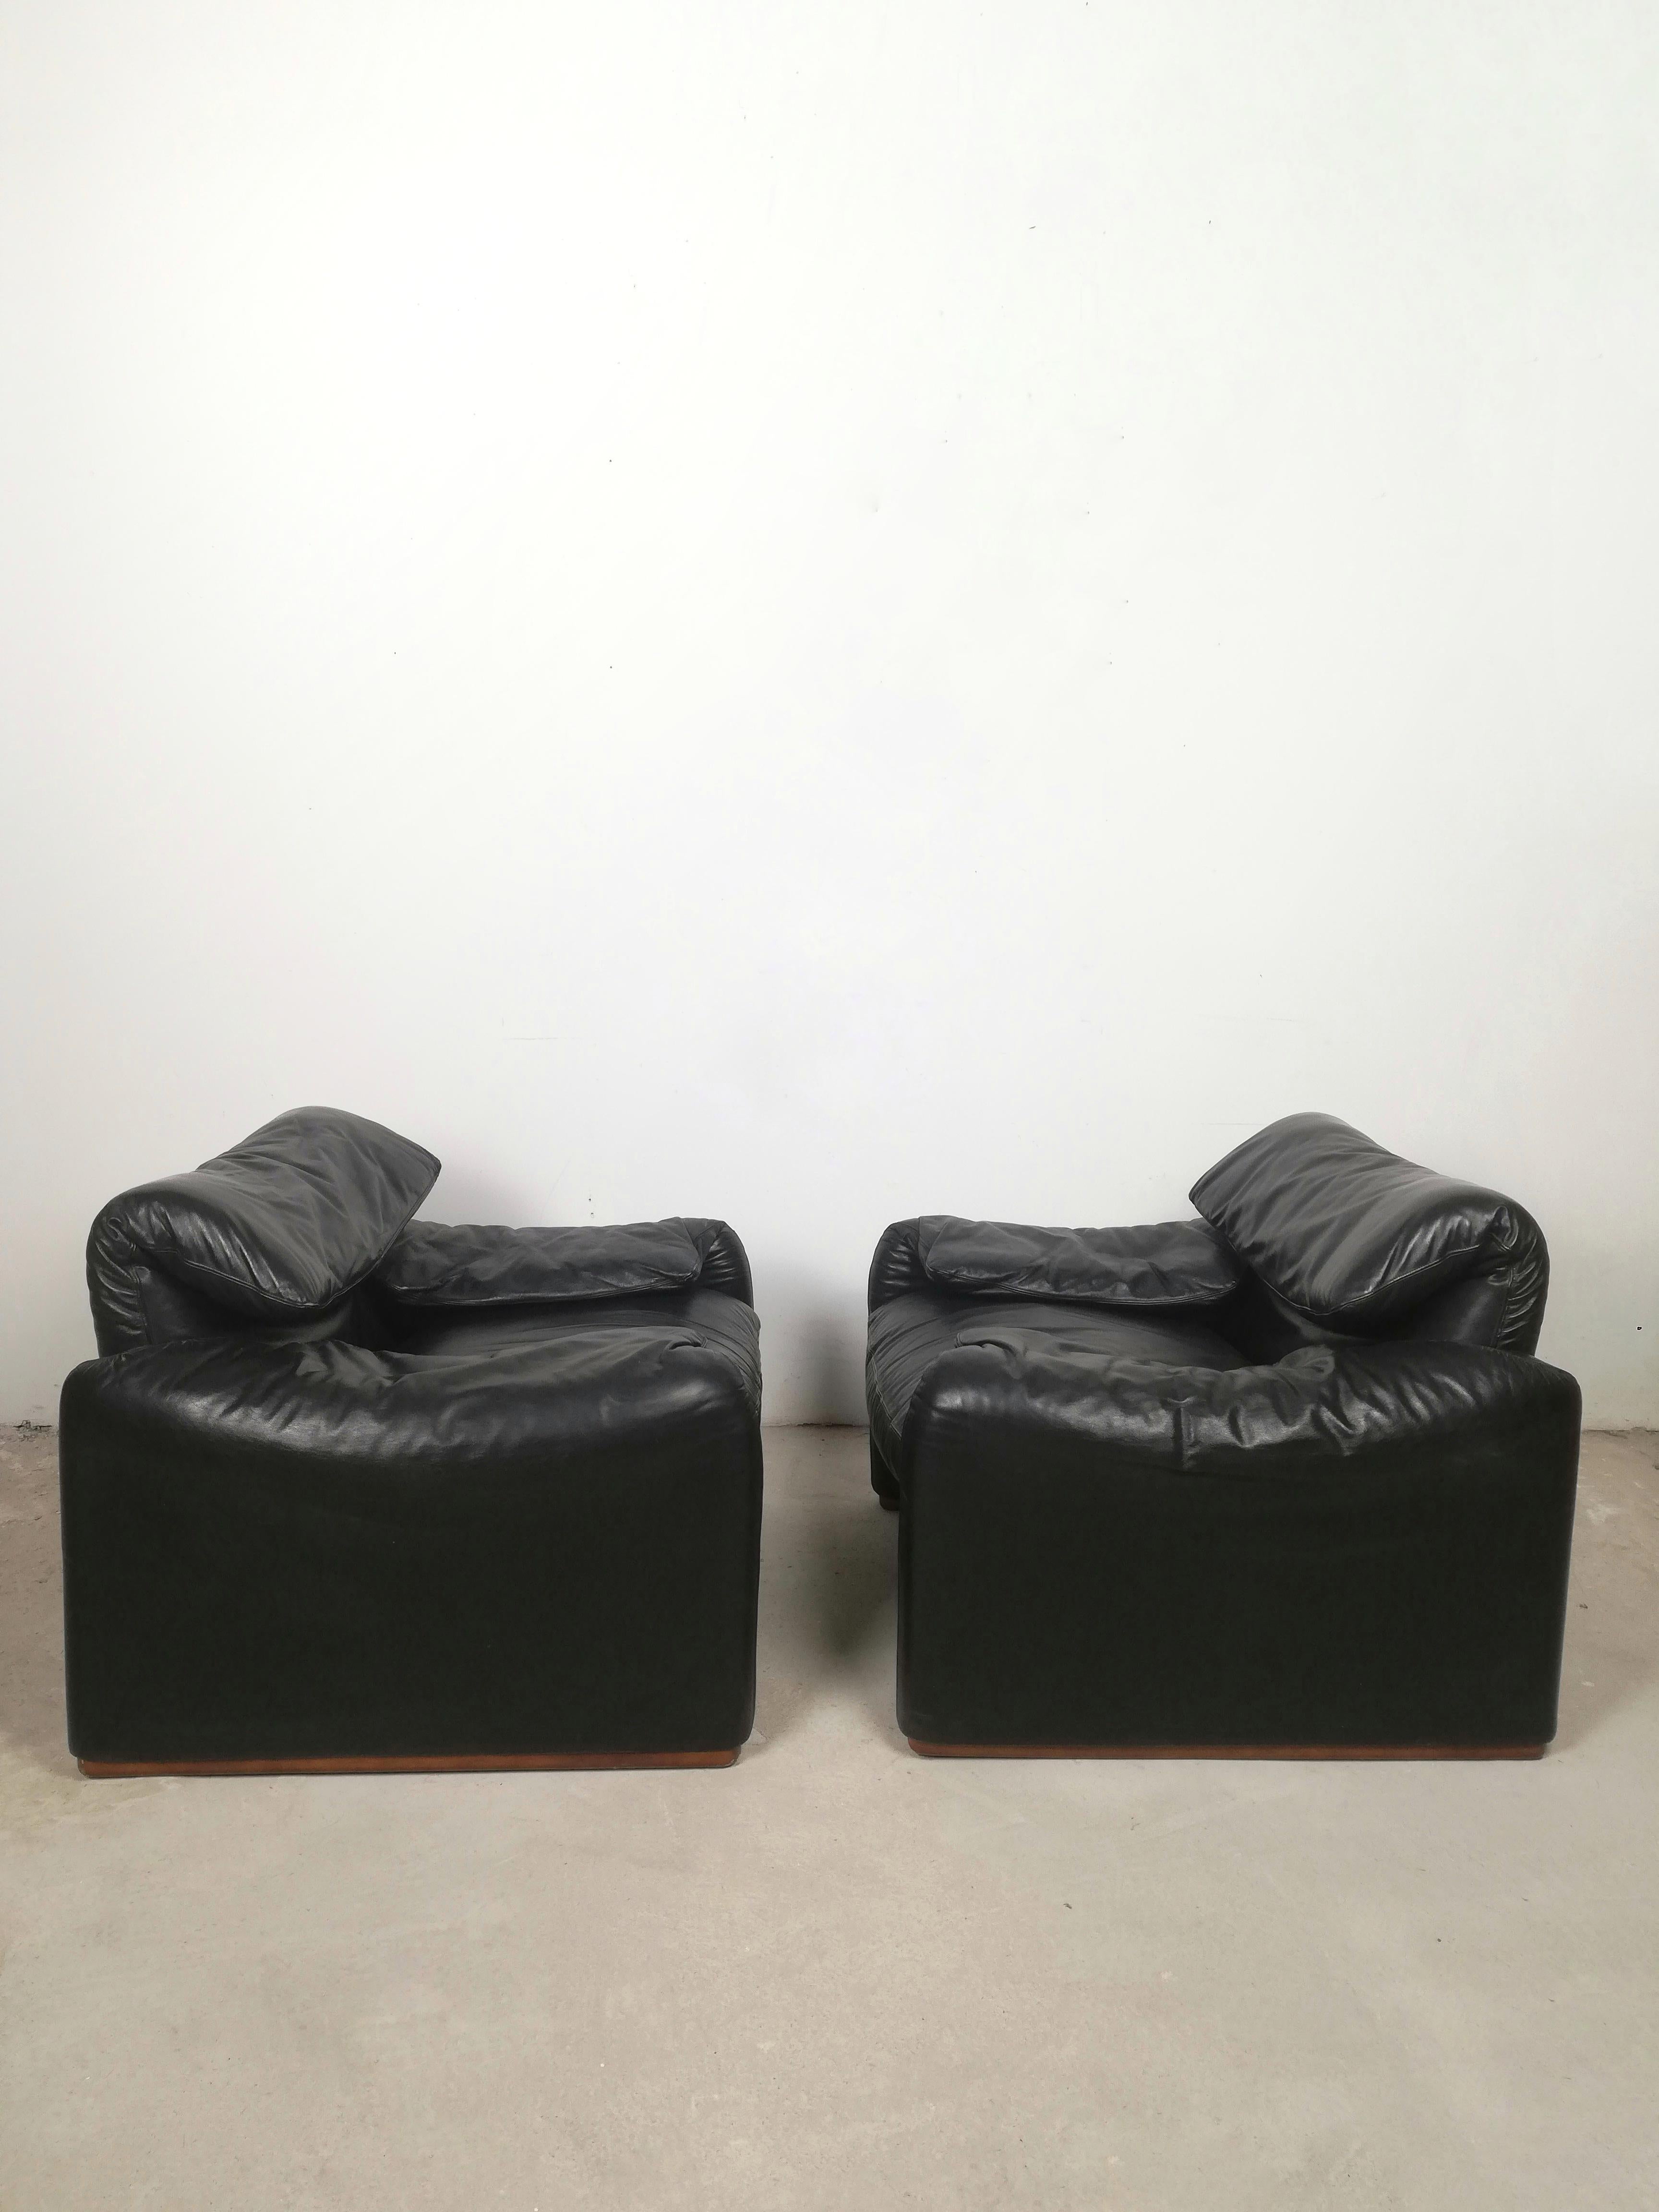 Set of two vintage Maralunga armchairs in black leather finish.
These iconic series were awarded the Compasso d'Oro in 1973 and are still part of the MOMA's permanent collection today.
Maralunga series combine the 